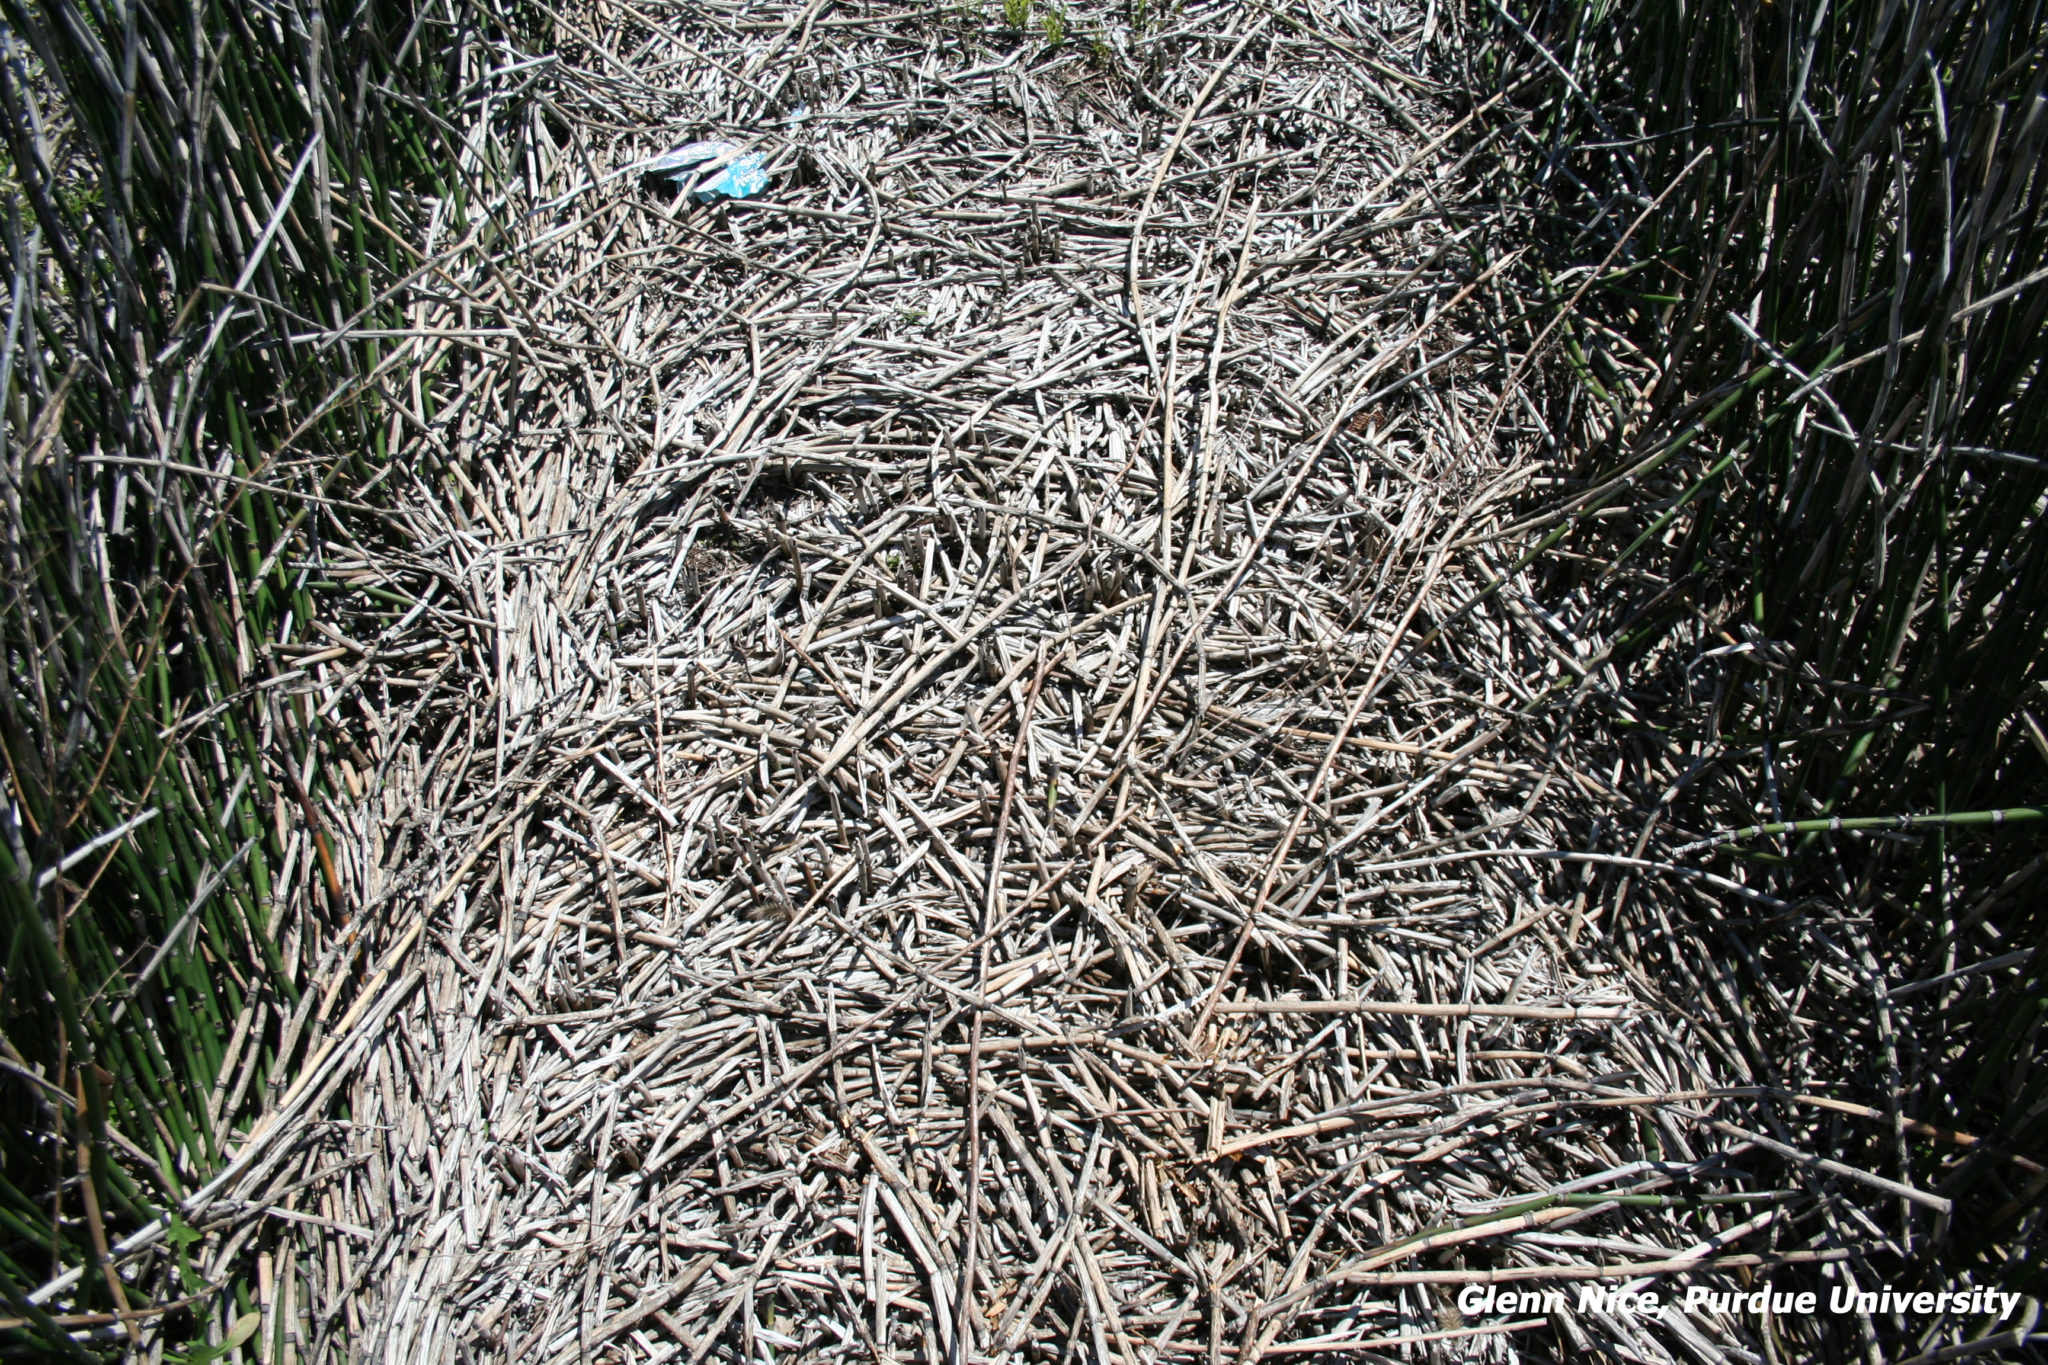 Figure 6. Habitat applied in the fall showing no regrowth in the spring. Picture taken 200 days after fall applications.